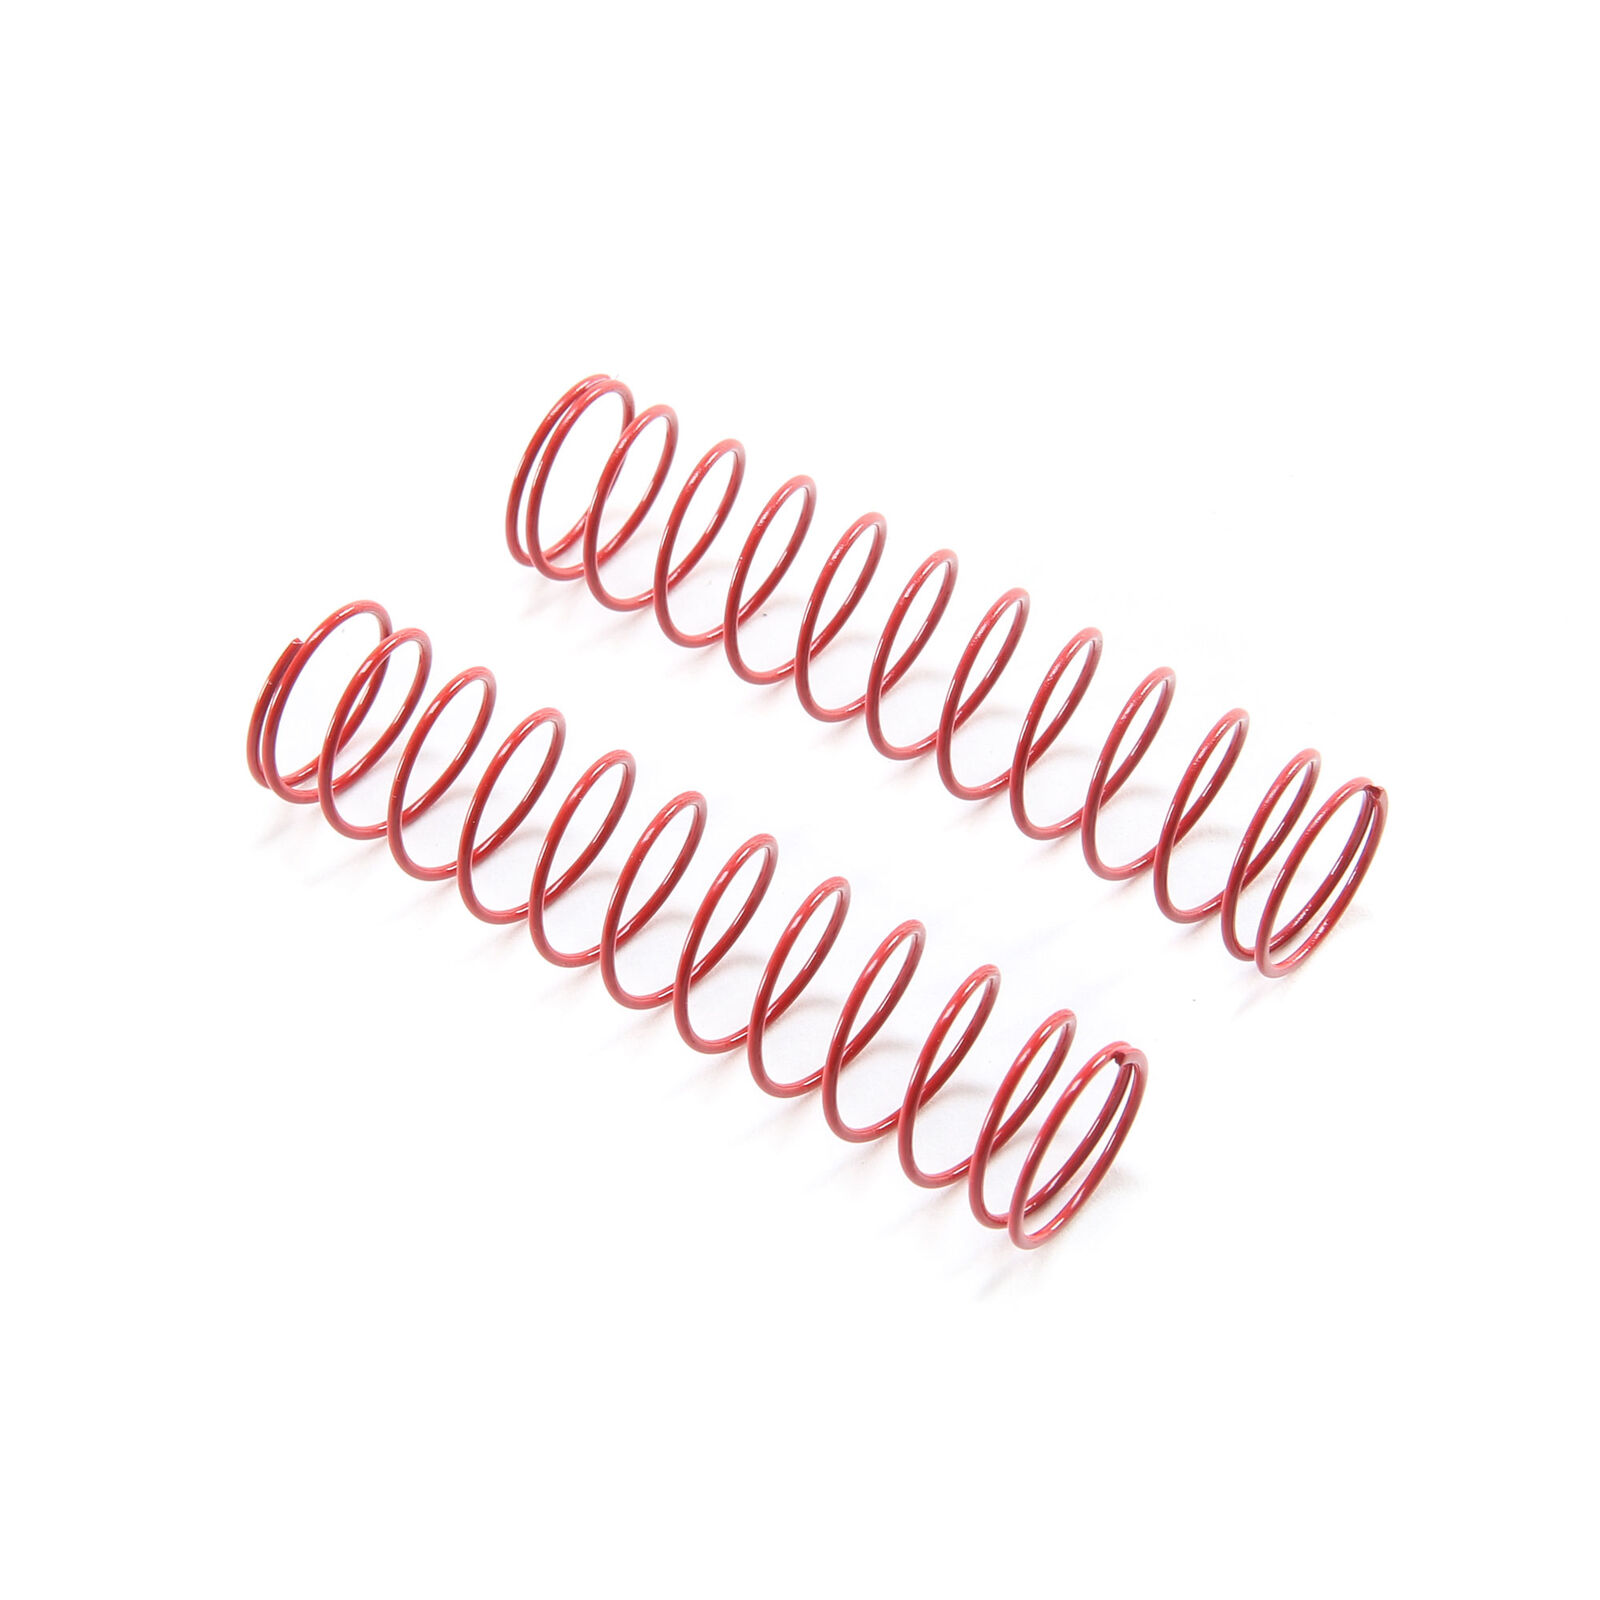 AXIAL Spring 12.5x60mm 1.13lbs -White (2) (Red Springs)